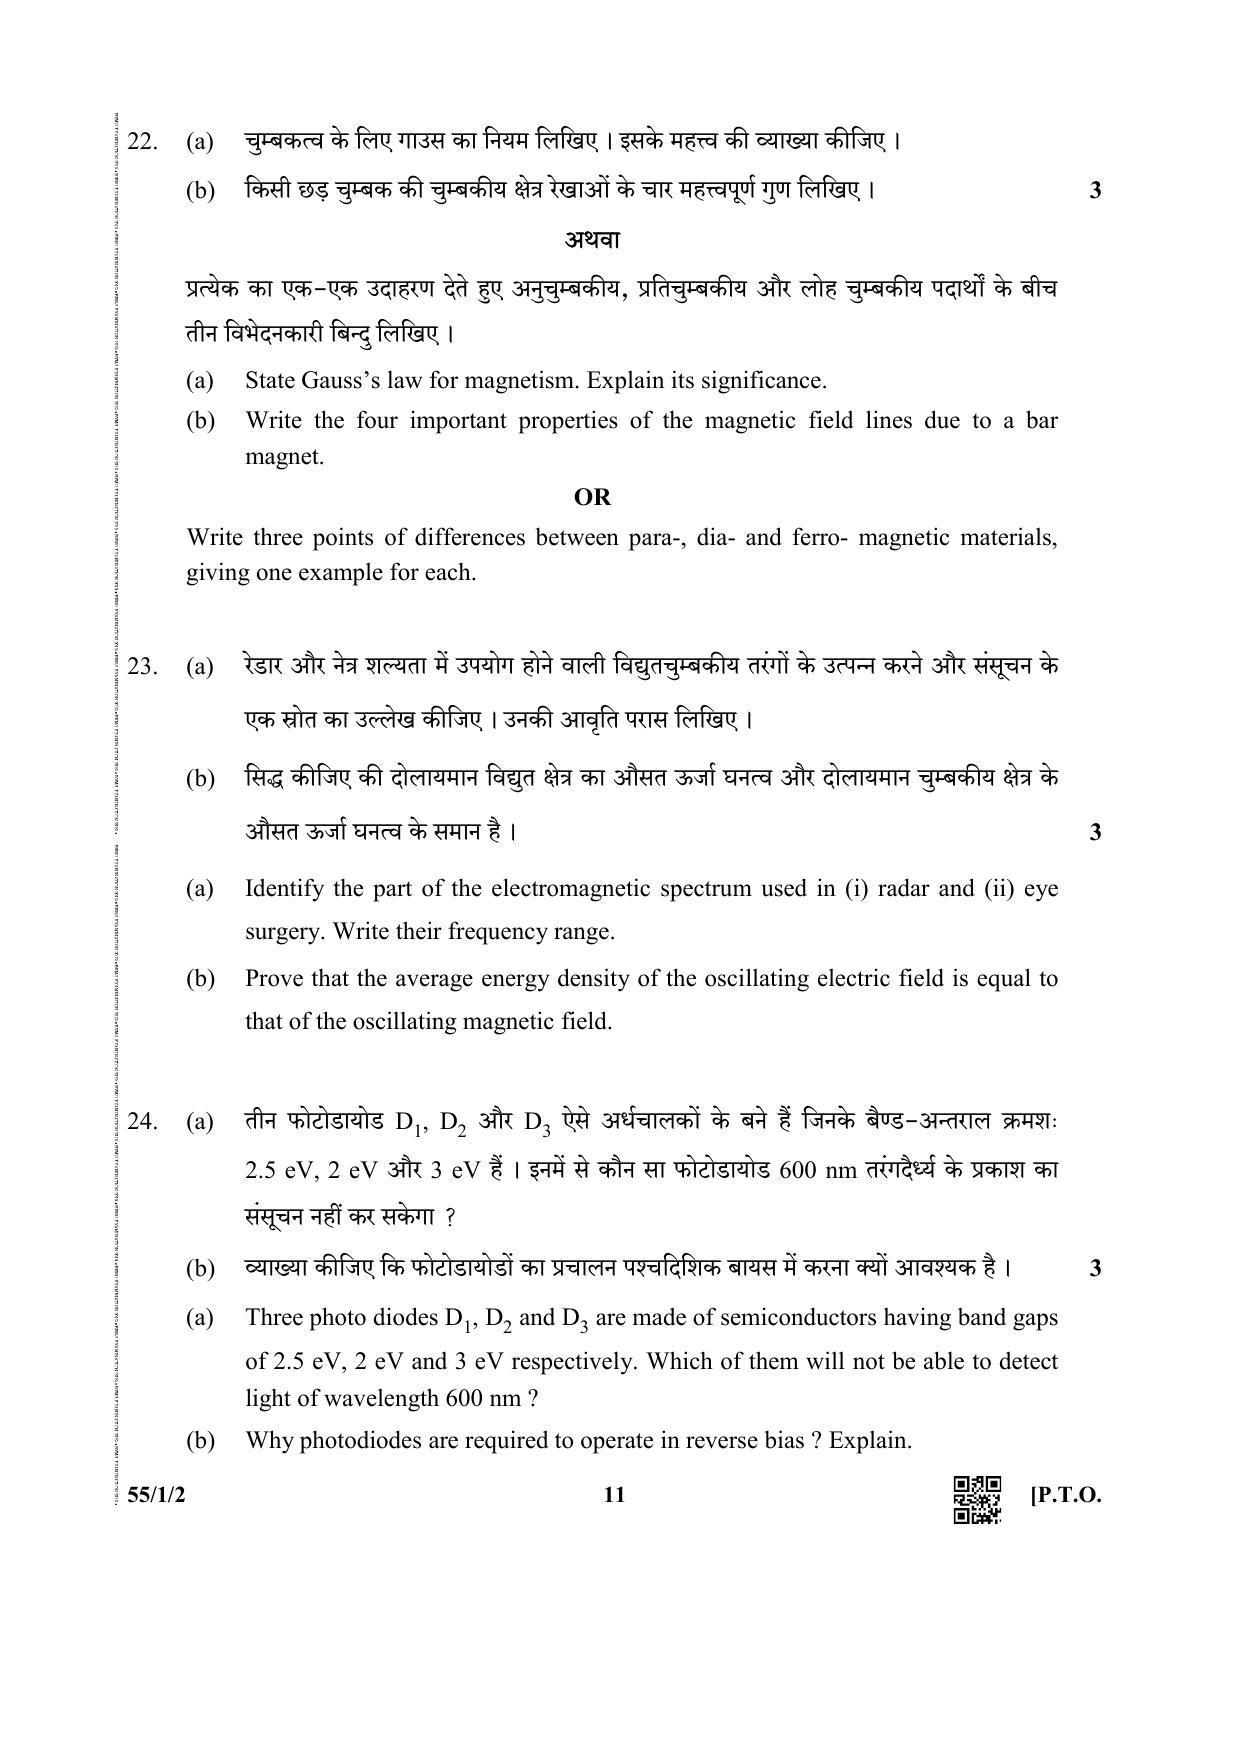 CBSE Class 12 55-1-2 (Physics) 2019 Question Paper - Page 11